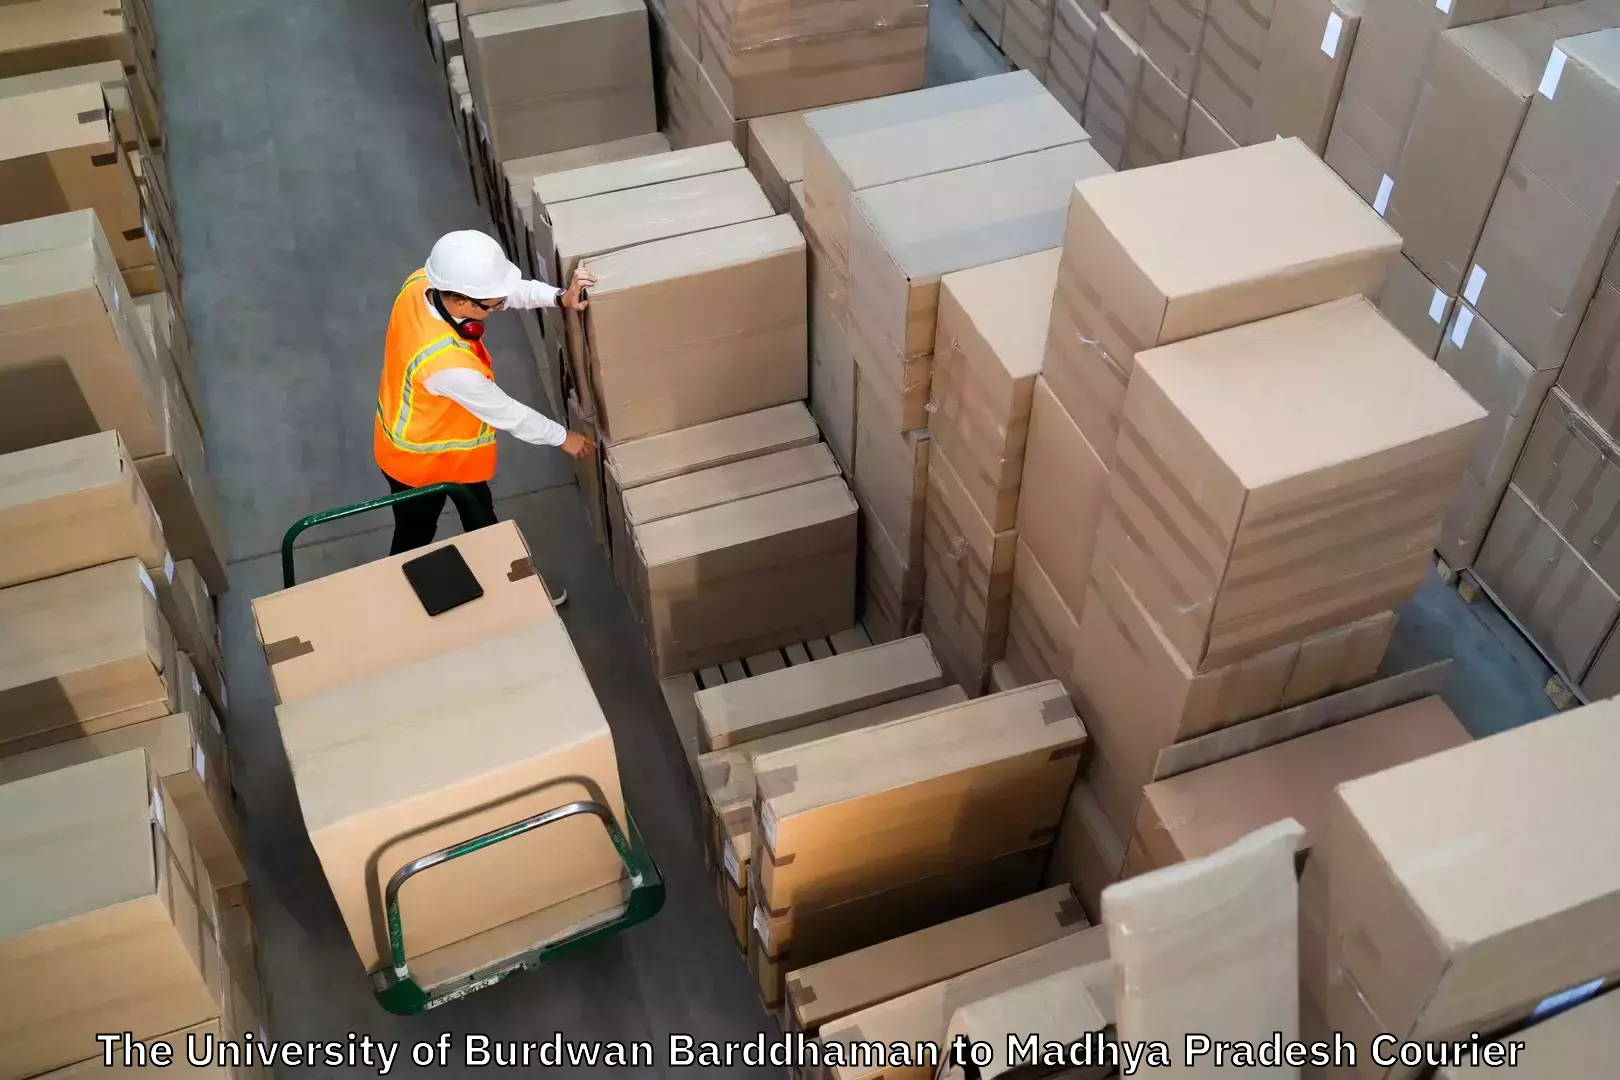 Luggage storage and delivery in The University of Burdwan Barddhaman to Mandsaur